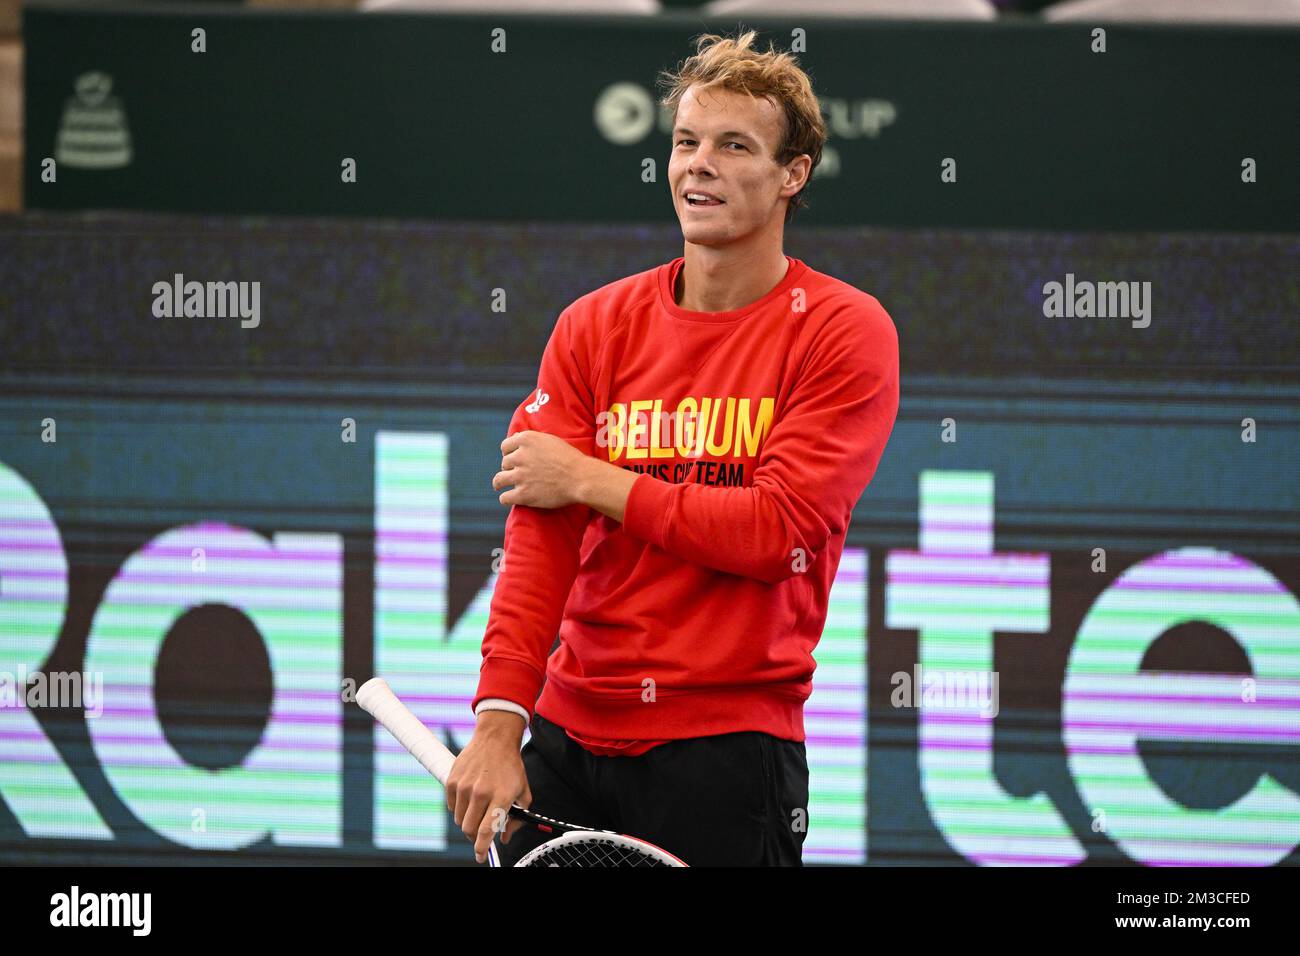 Belgian Michael Geerts pictured during a training session of the Belgian team during the group stage of the 2022 Davis Cup finals, Friday 16 September 2022, in Hamburg, Germany